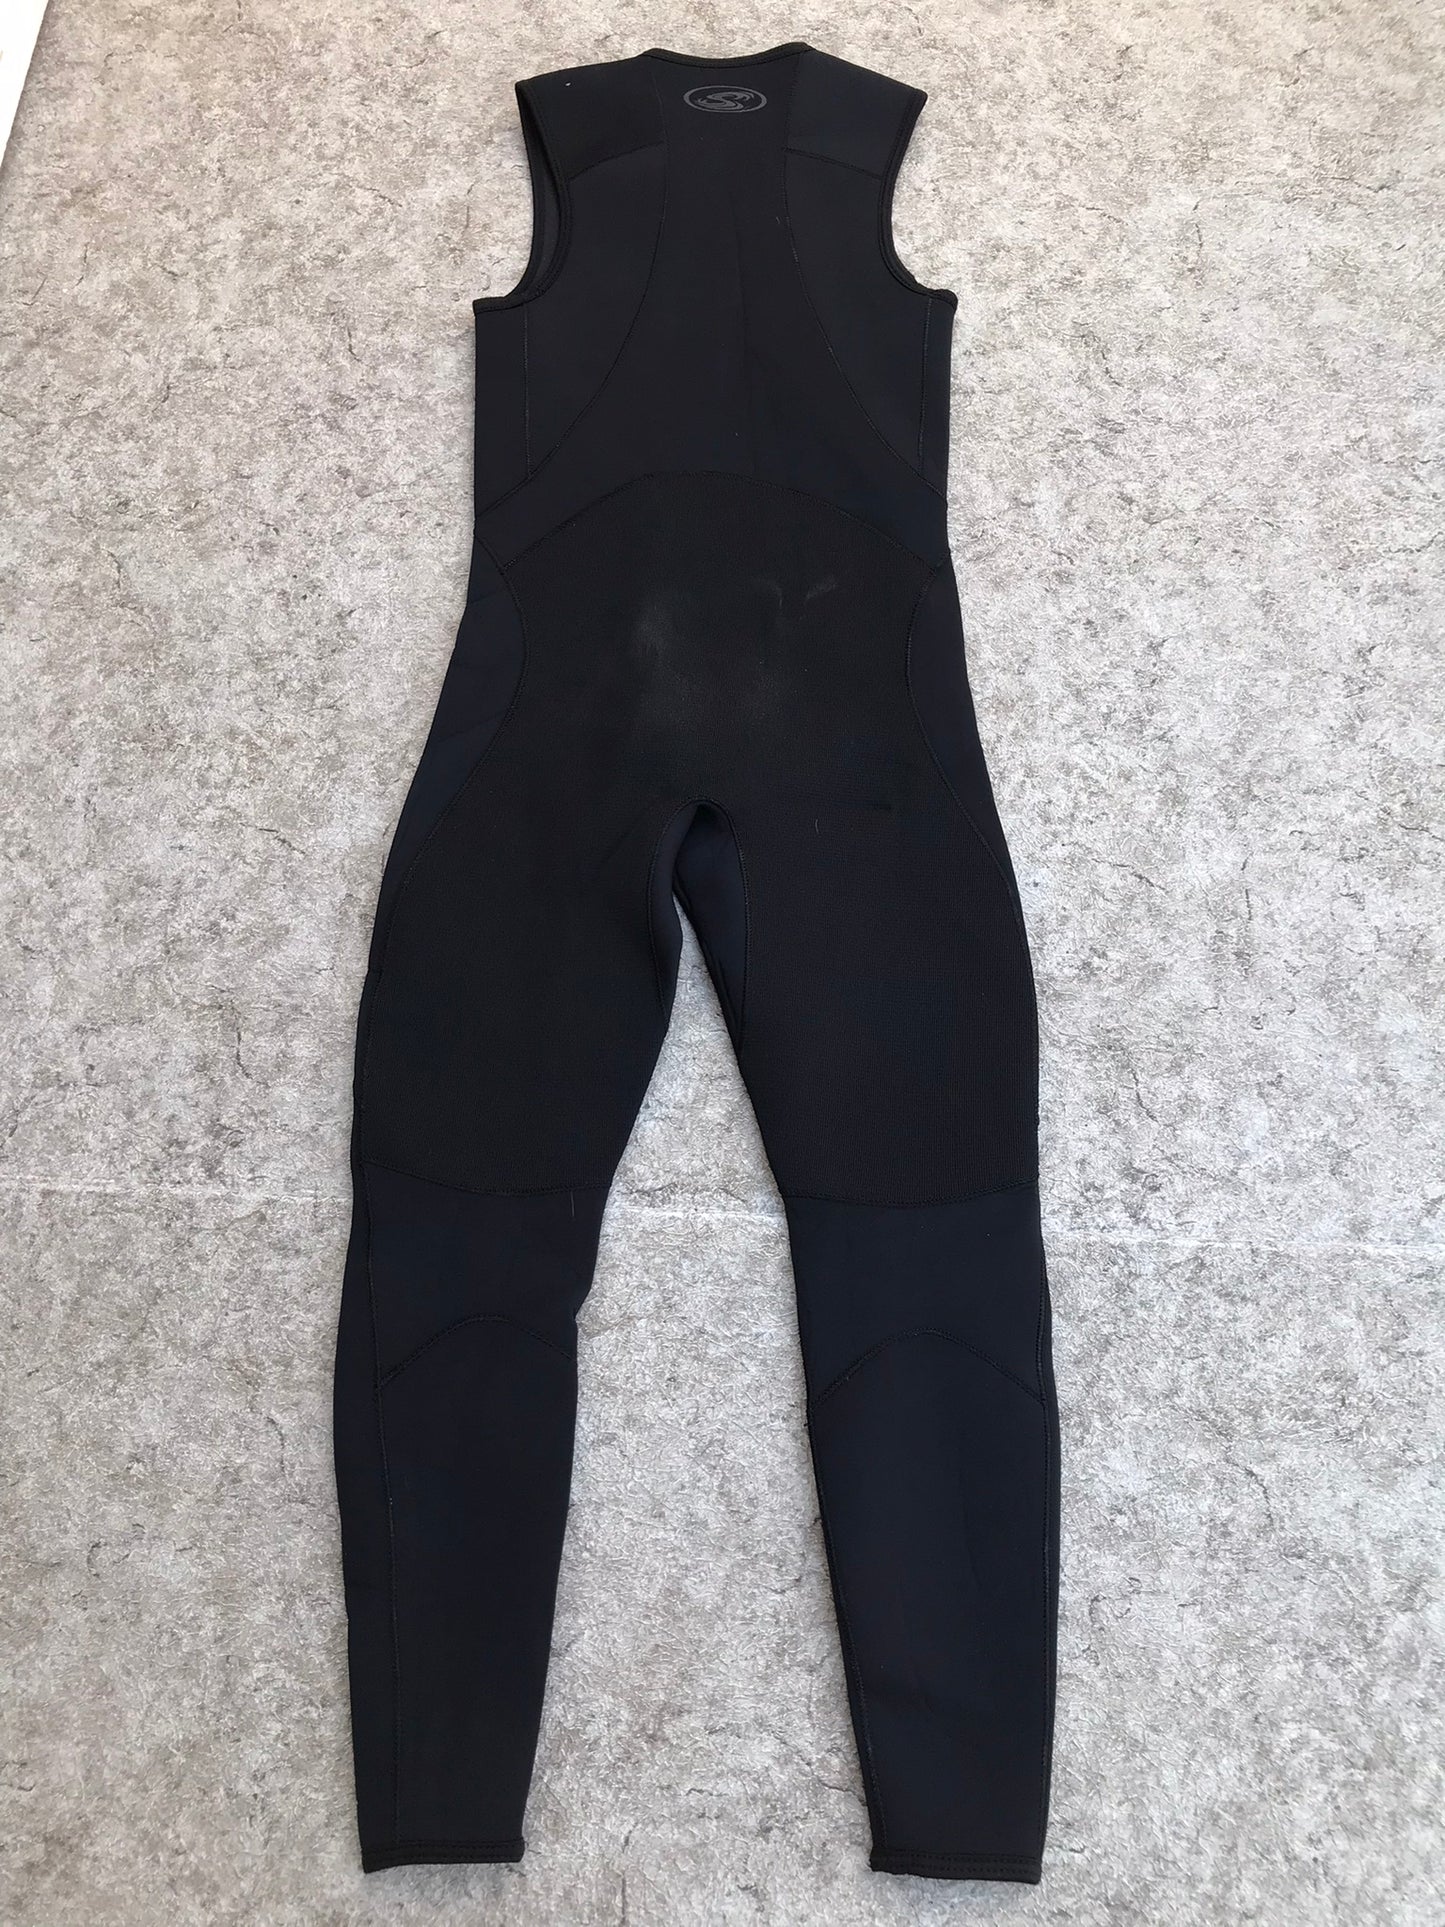 Wetsuit Ladies Size Small Full John Stohlquist Black With Padded Knee 3 mm Surf Water Ski Kayak Paddleboard Canoe Sail New Demo